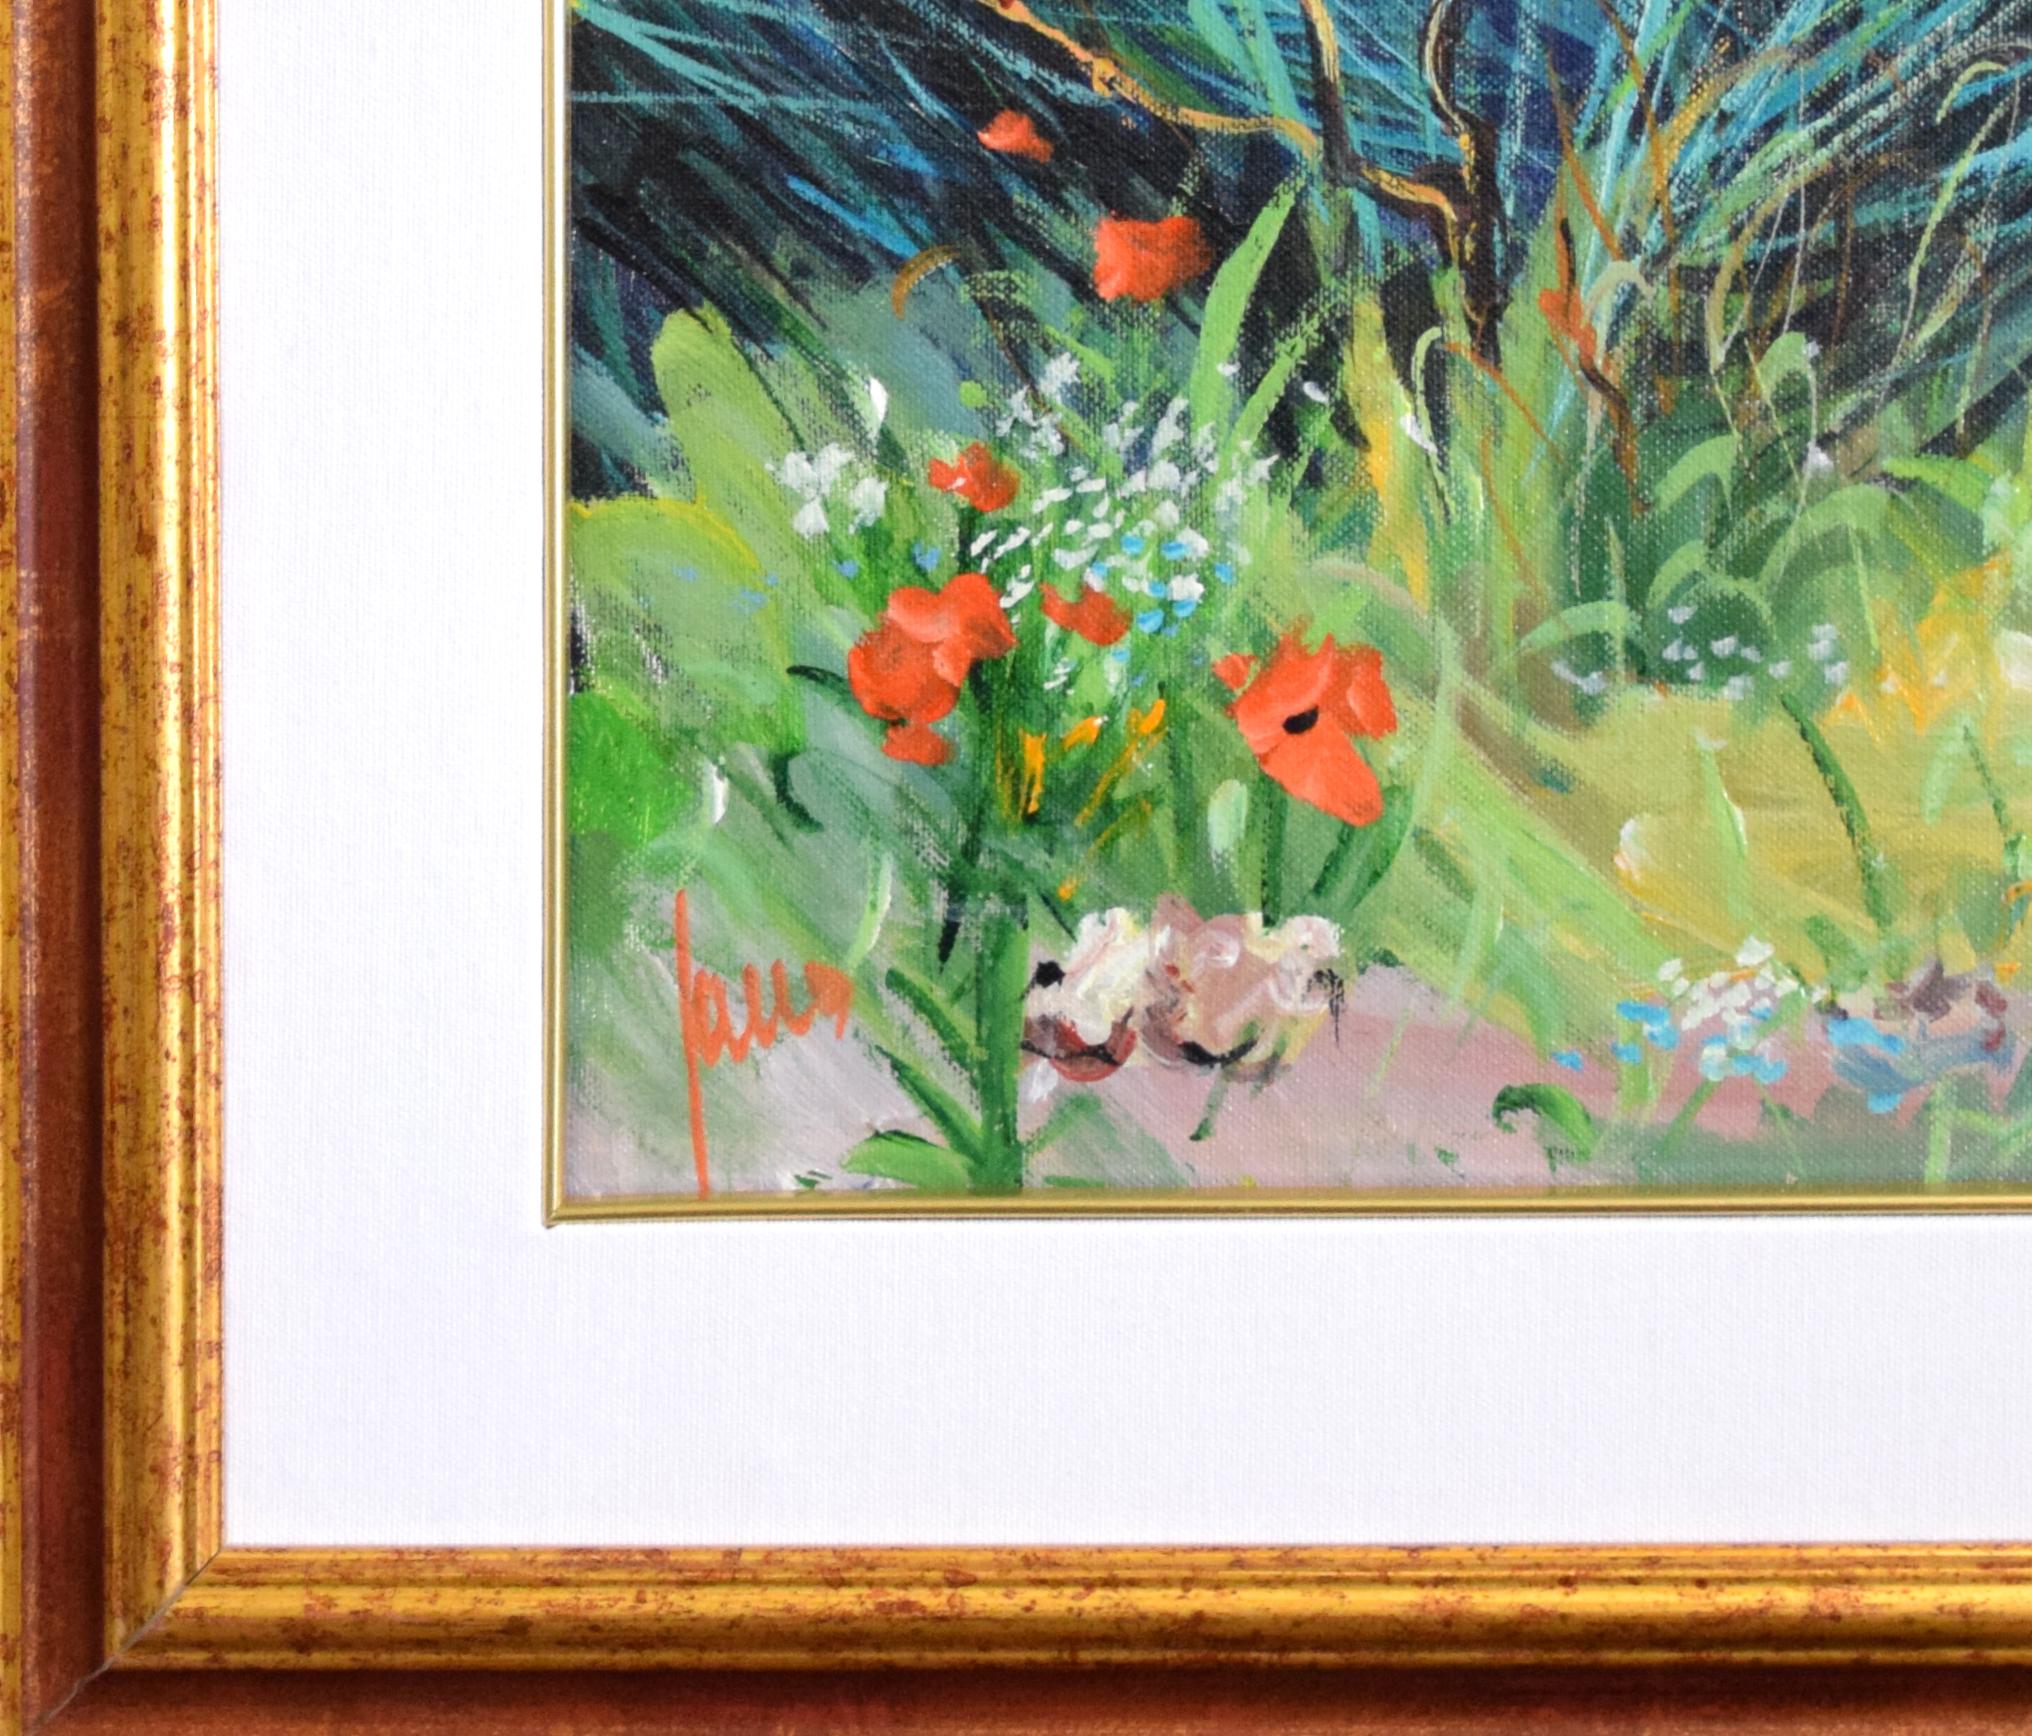 Ginestre e papaveri is a very colorful oil painting on canvas realized by the Italian contemporary artist Luciano Sacco.

Including a frame (78 x 98 cm). Hand-signed by the artist on the lower left.

This oil painting represents a spring landscape